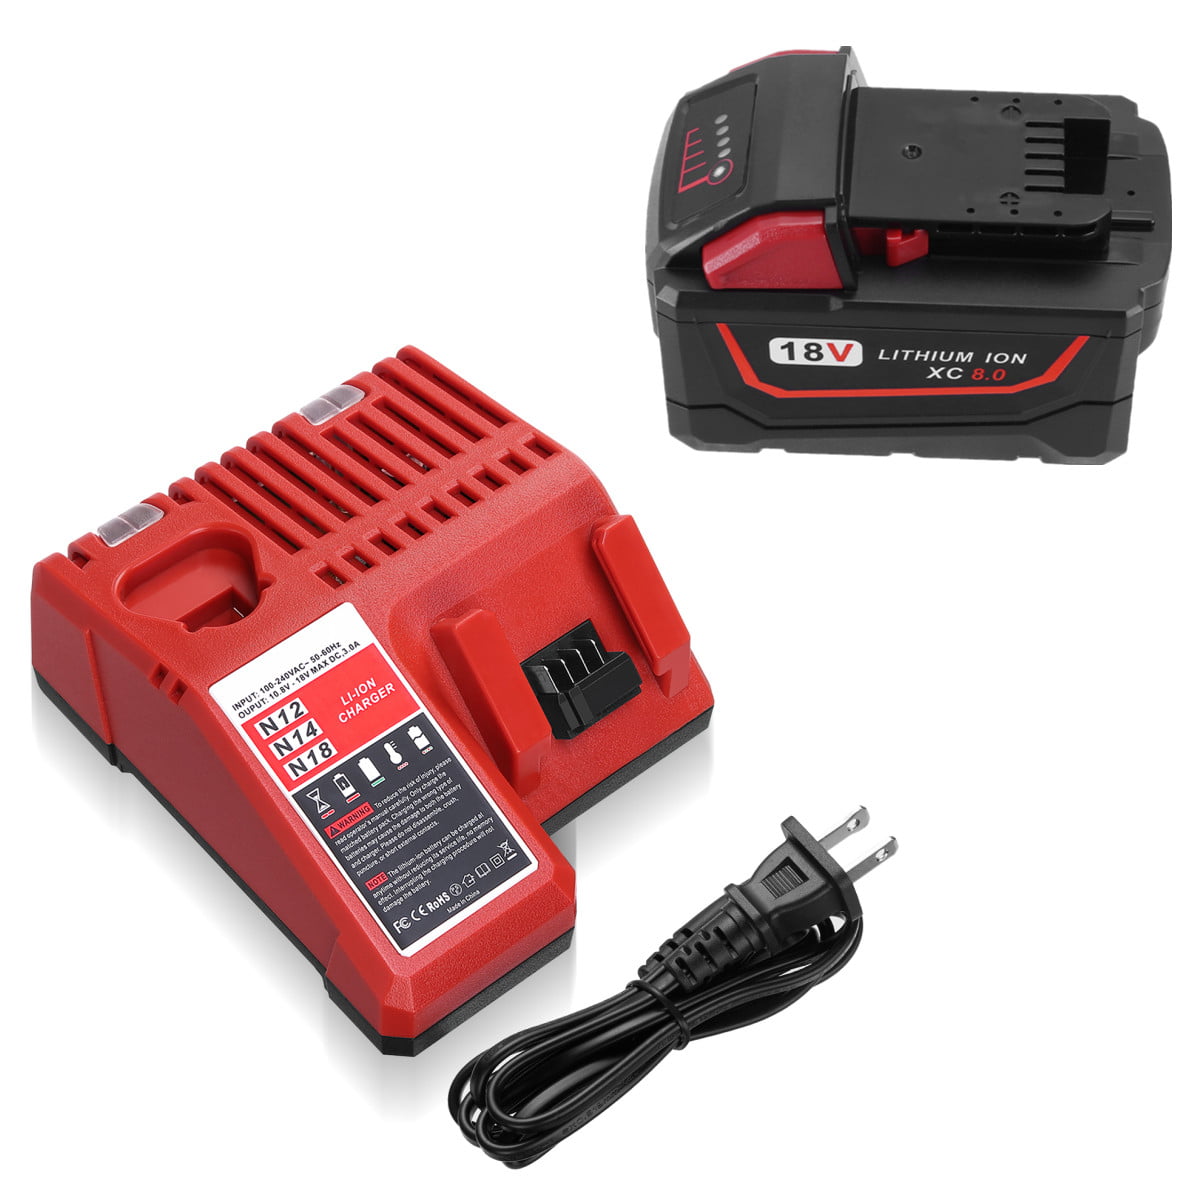 USB Mobile battery charger adaptor for Milwaukee M18 C18B 18V battery Iphone 